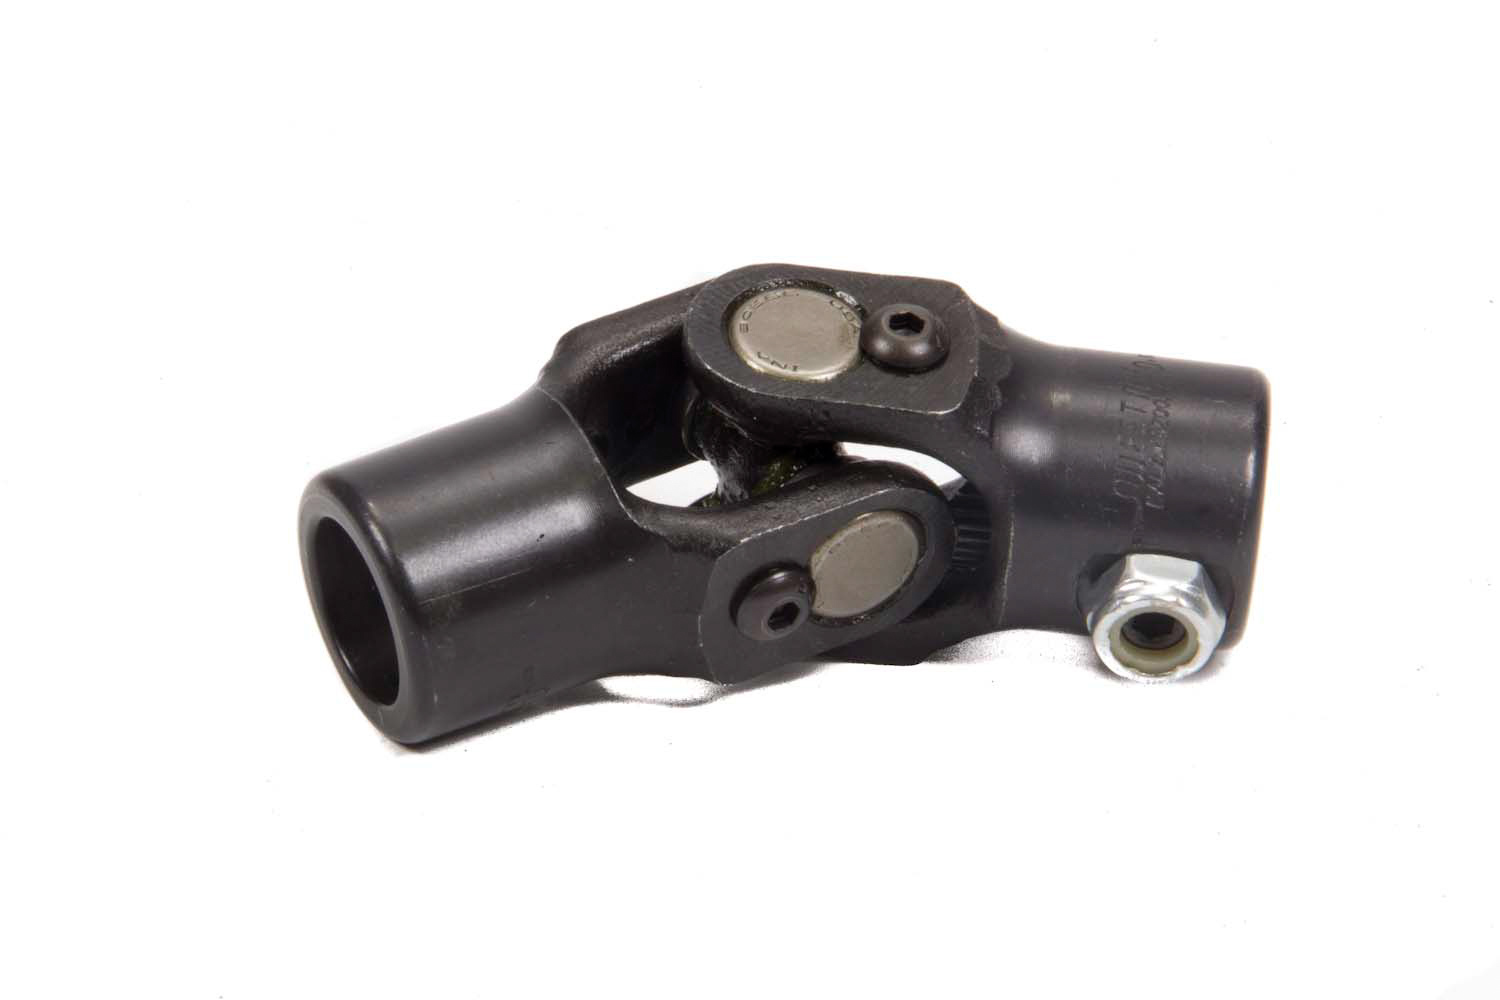 Sweet Manufacturing 401-50620 Steering Universal Joint, Single Joint, 3/4 in Smooth Bore to 1 in Double D, Steel, Black Paint, Each